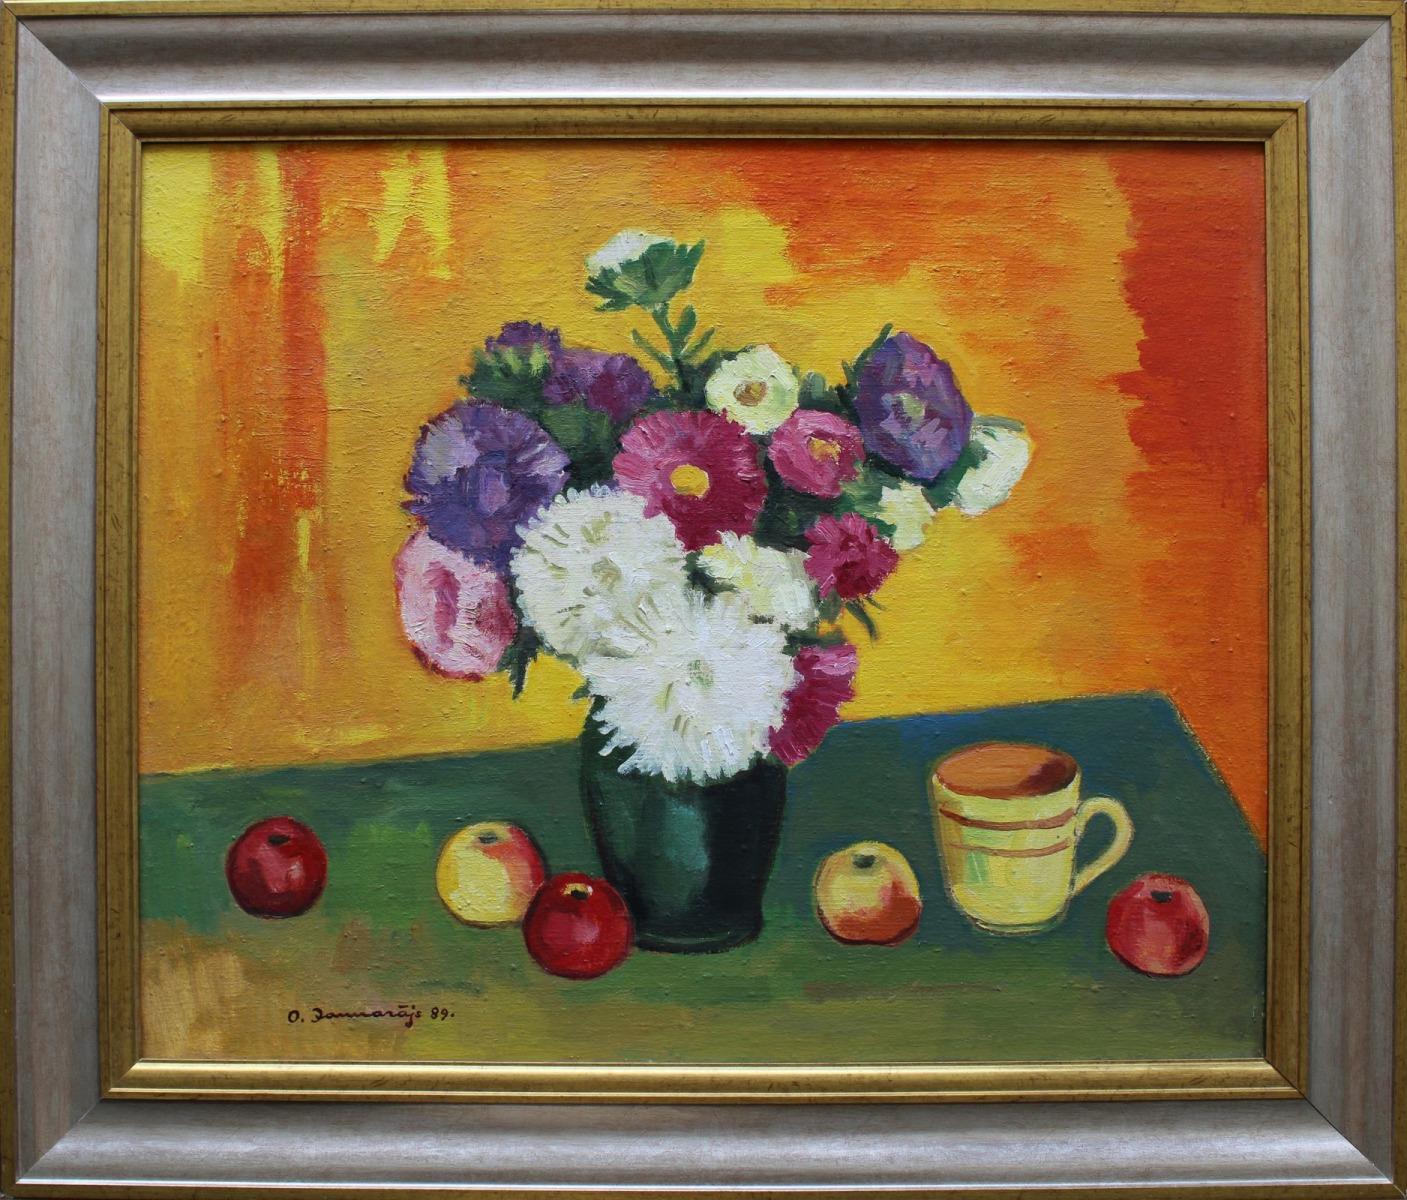 Still life with apples. 1989. Oil on canvas, 60x73 cm - Painting by Olgerts Jaunarajs